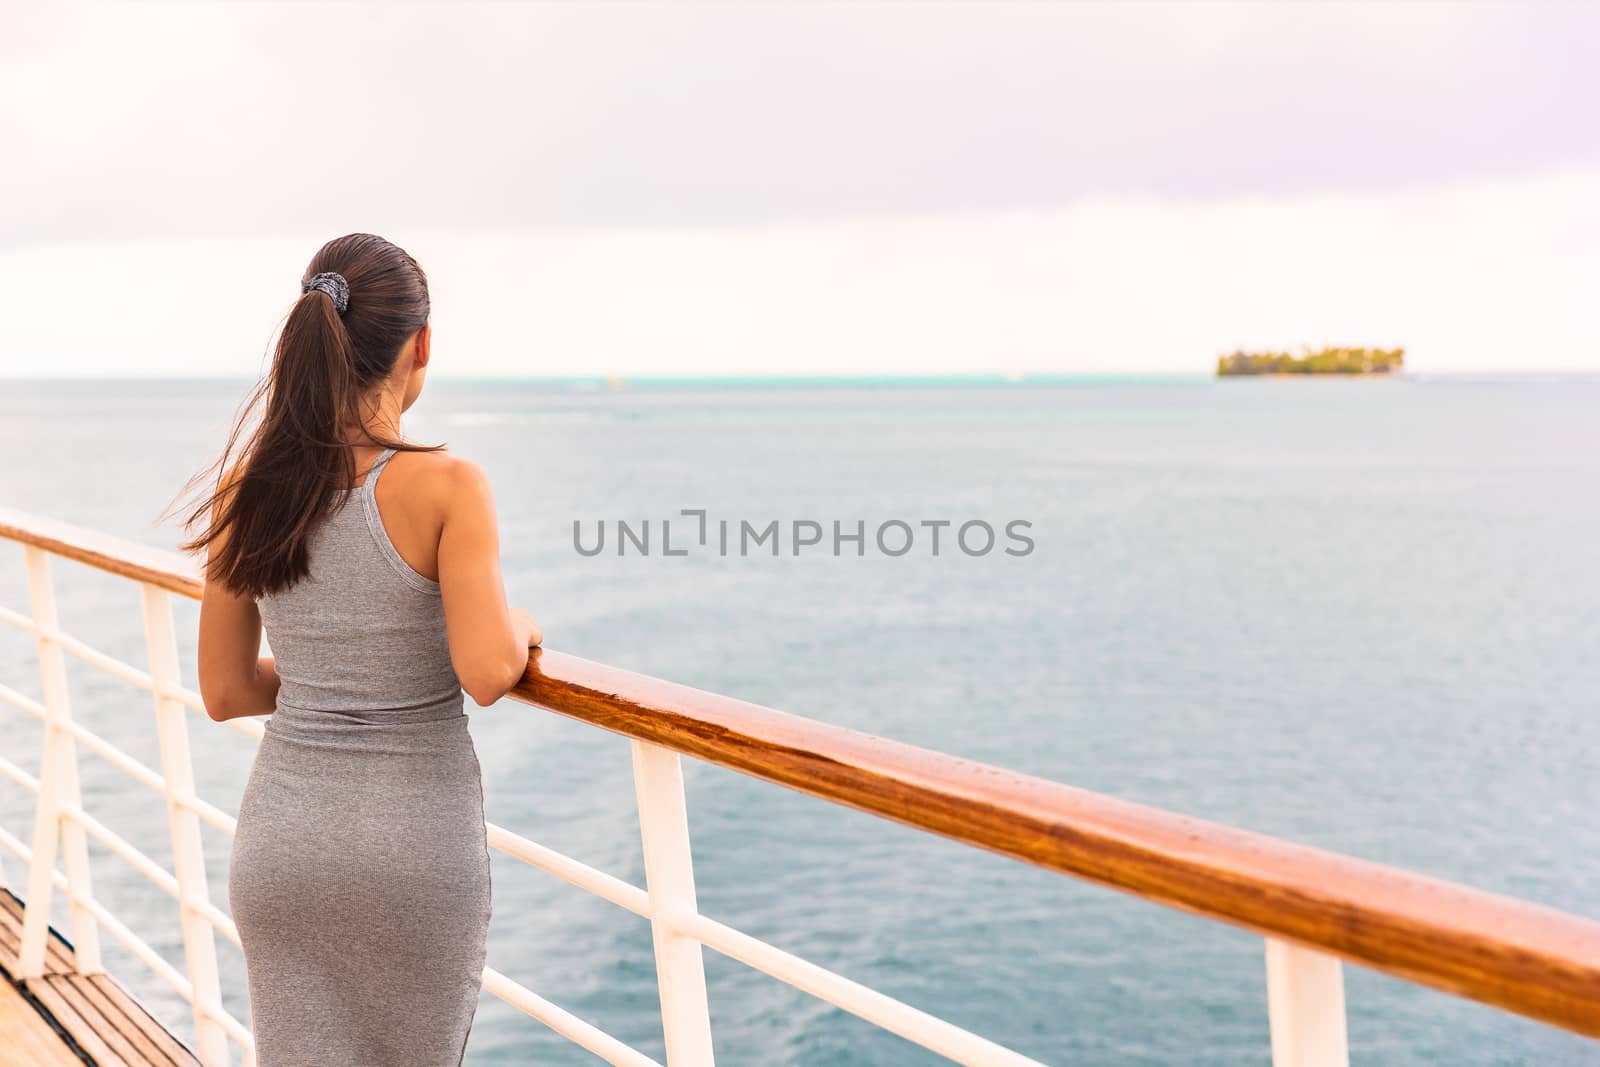 Luxury cruise ship vacation on tropical ocean travel - Young tourist woman watching sunset on deck of cruising boat. Tahiti destination, island in background.